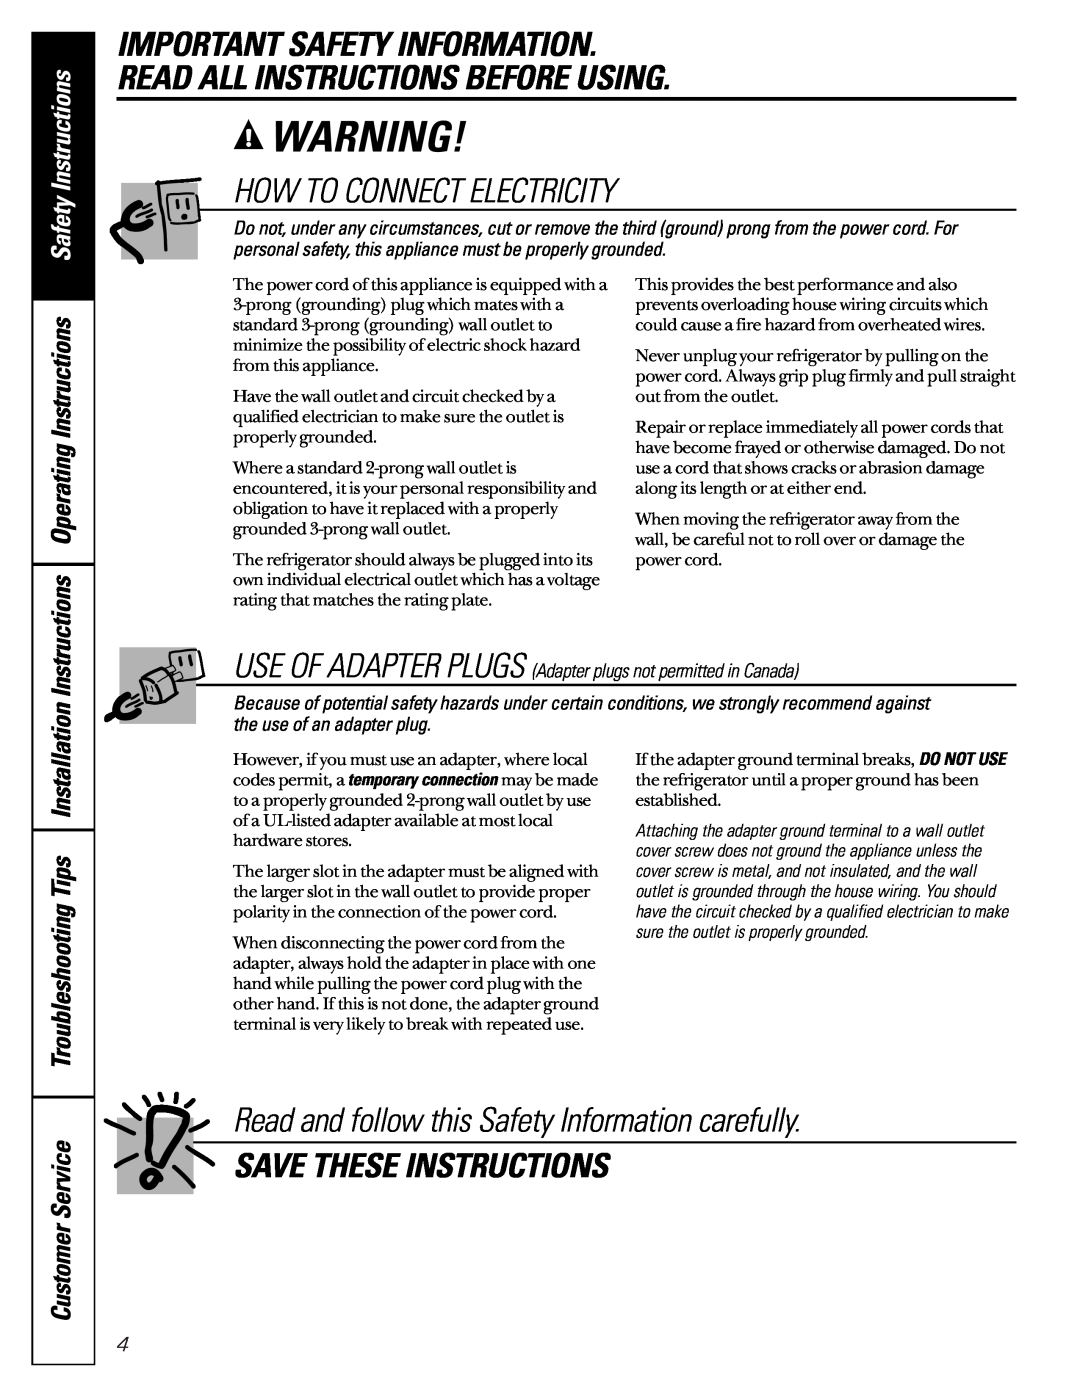 GE 162D6733P007 How To Connect Electricity, Save These Instructions, Read and follow this Safety Information carefully 